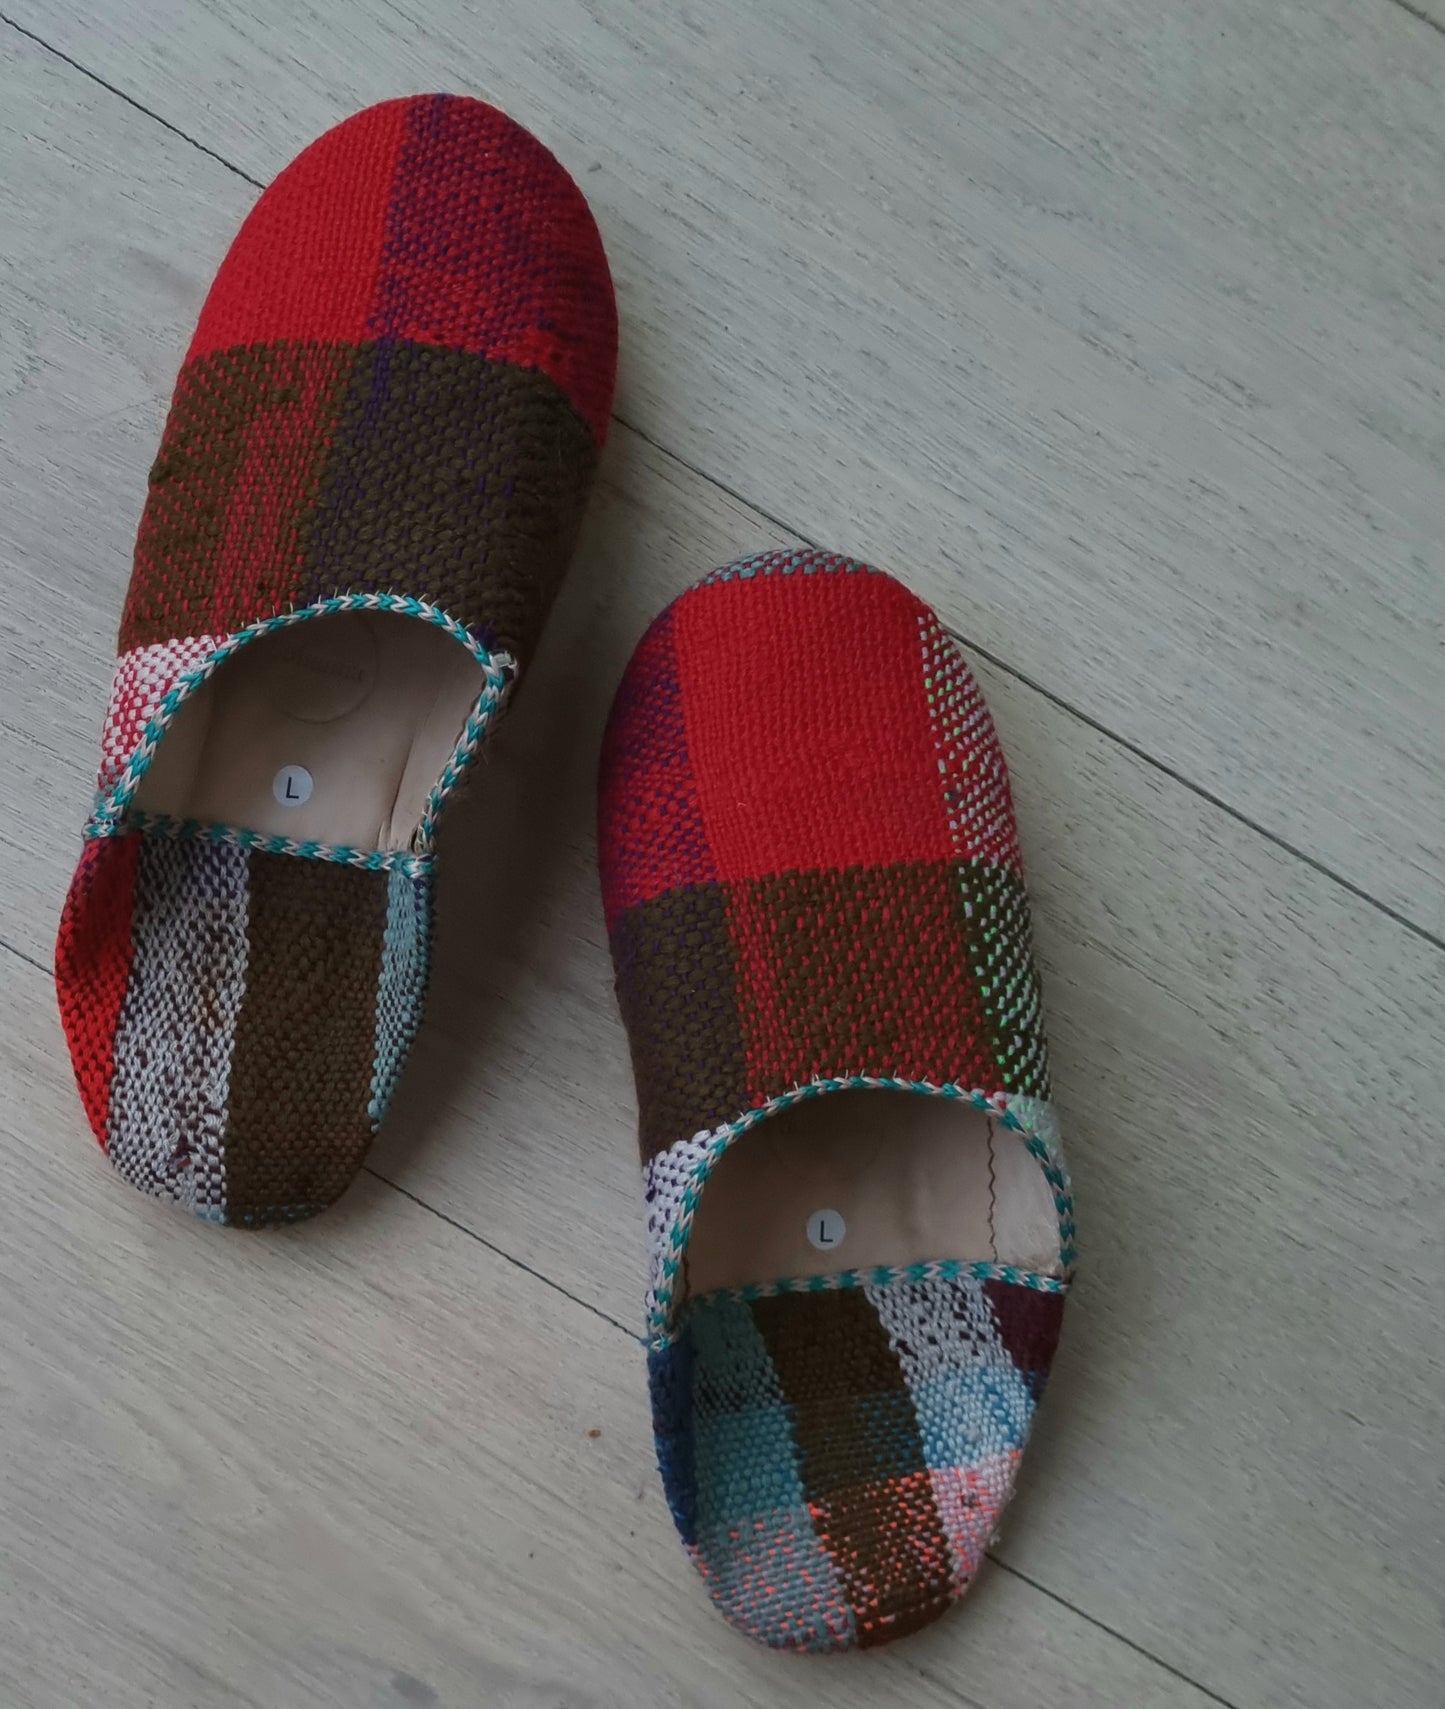 Moroccan Babouch slippers